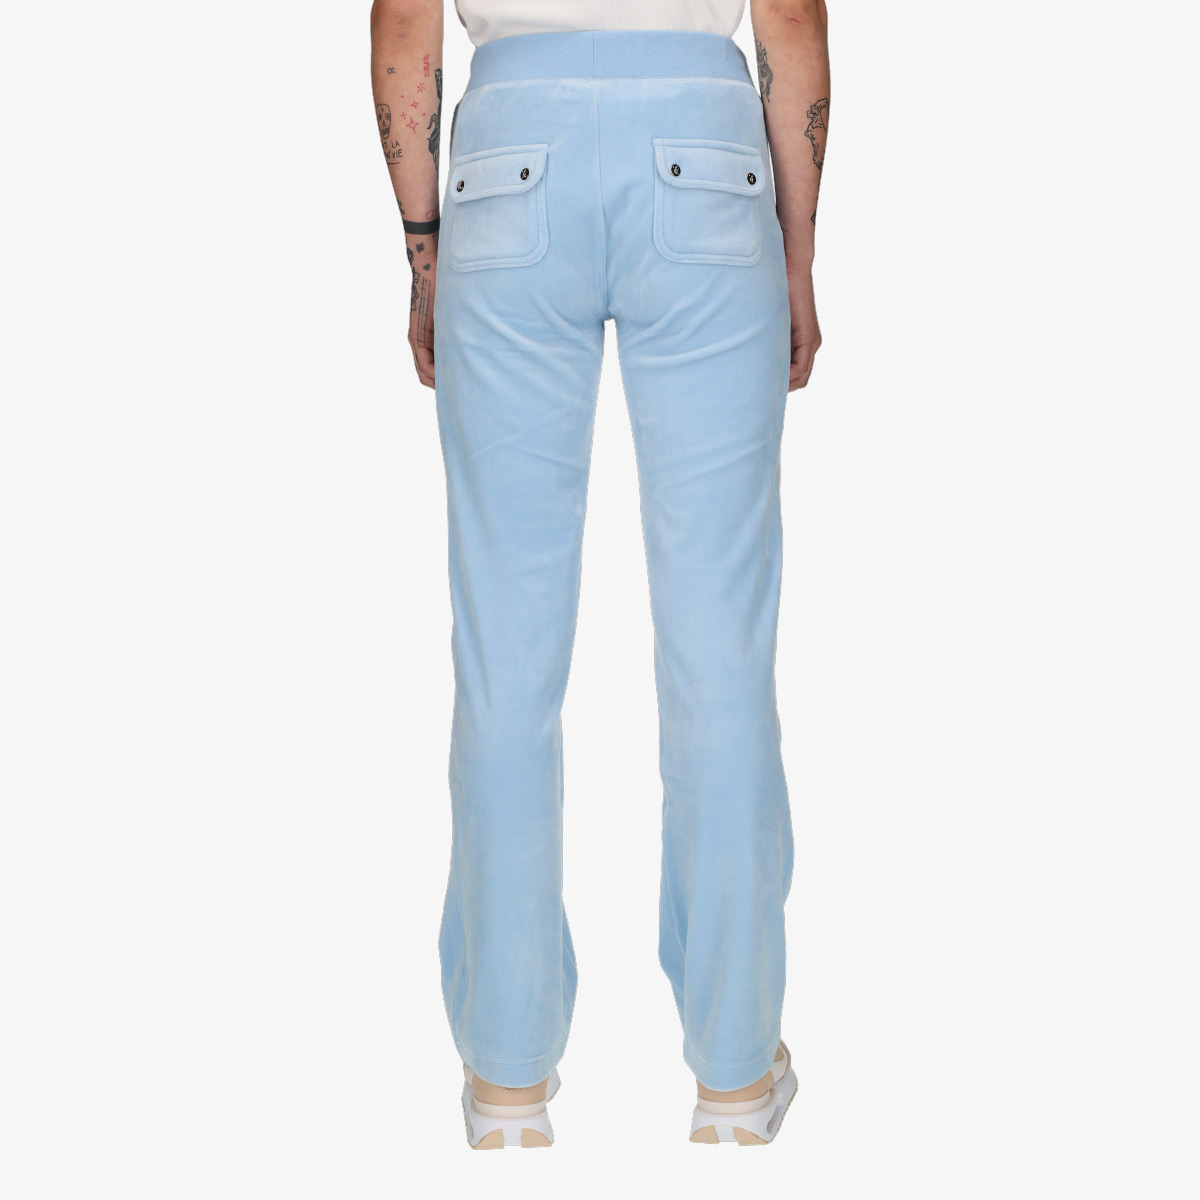 Juicy Couture Долен дел тренерки Del Ray Pocket Pant 